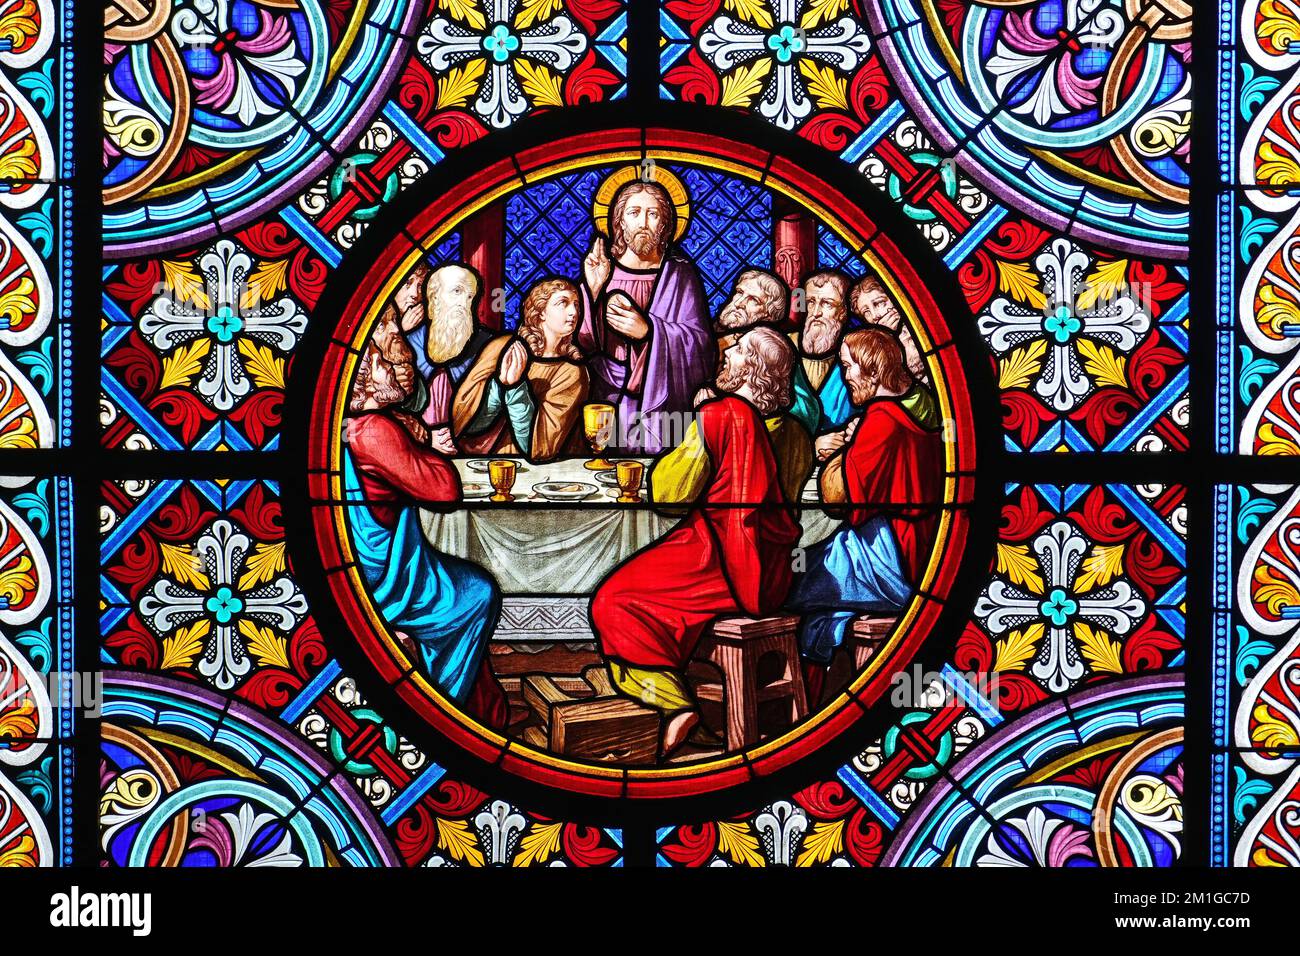 Basel Cathedral Minster. Stained glass window. The Last Supper is the final meal that Jesus shared with his Apostles. Basel, Switzerland - December 20 Stock Photo